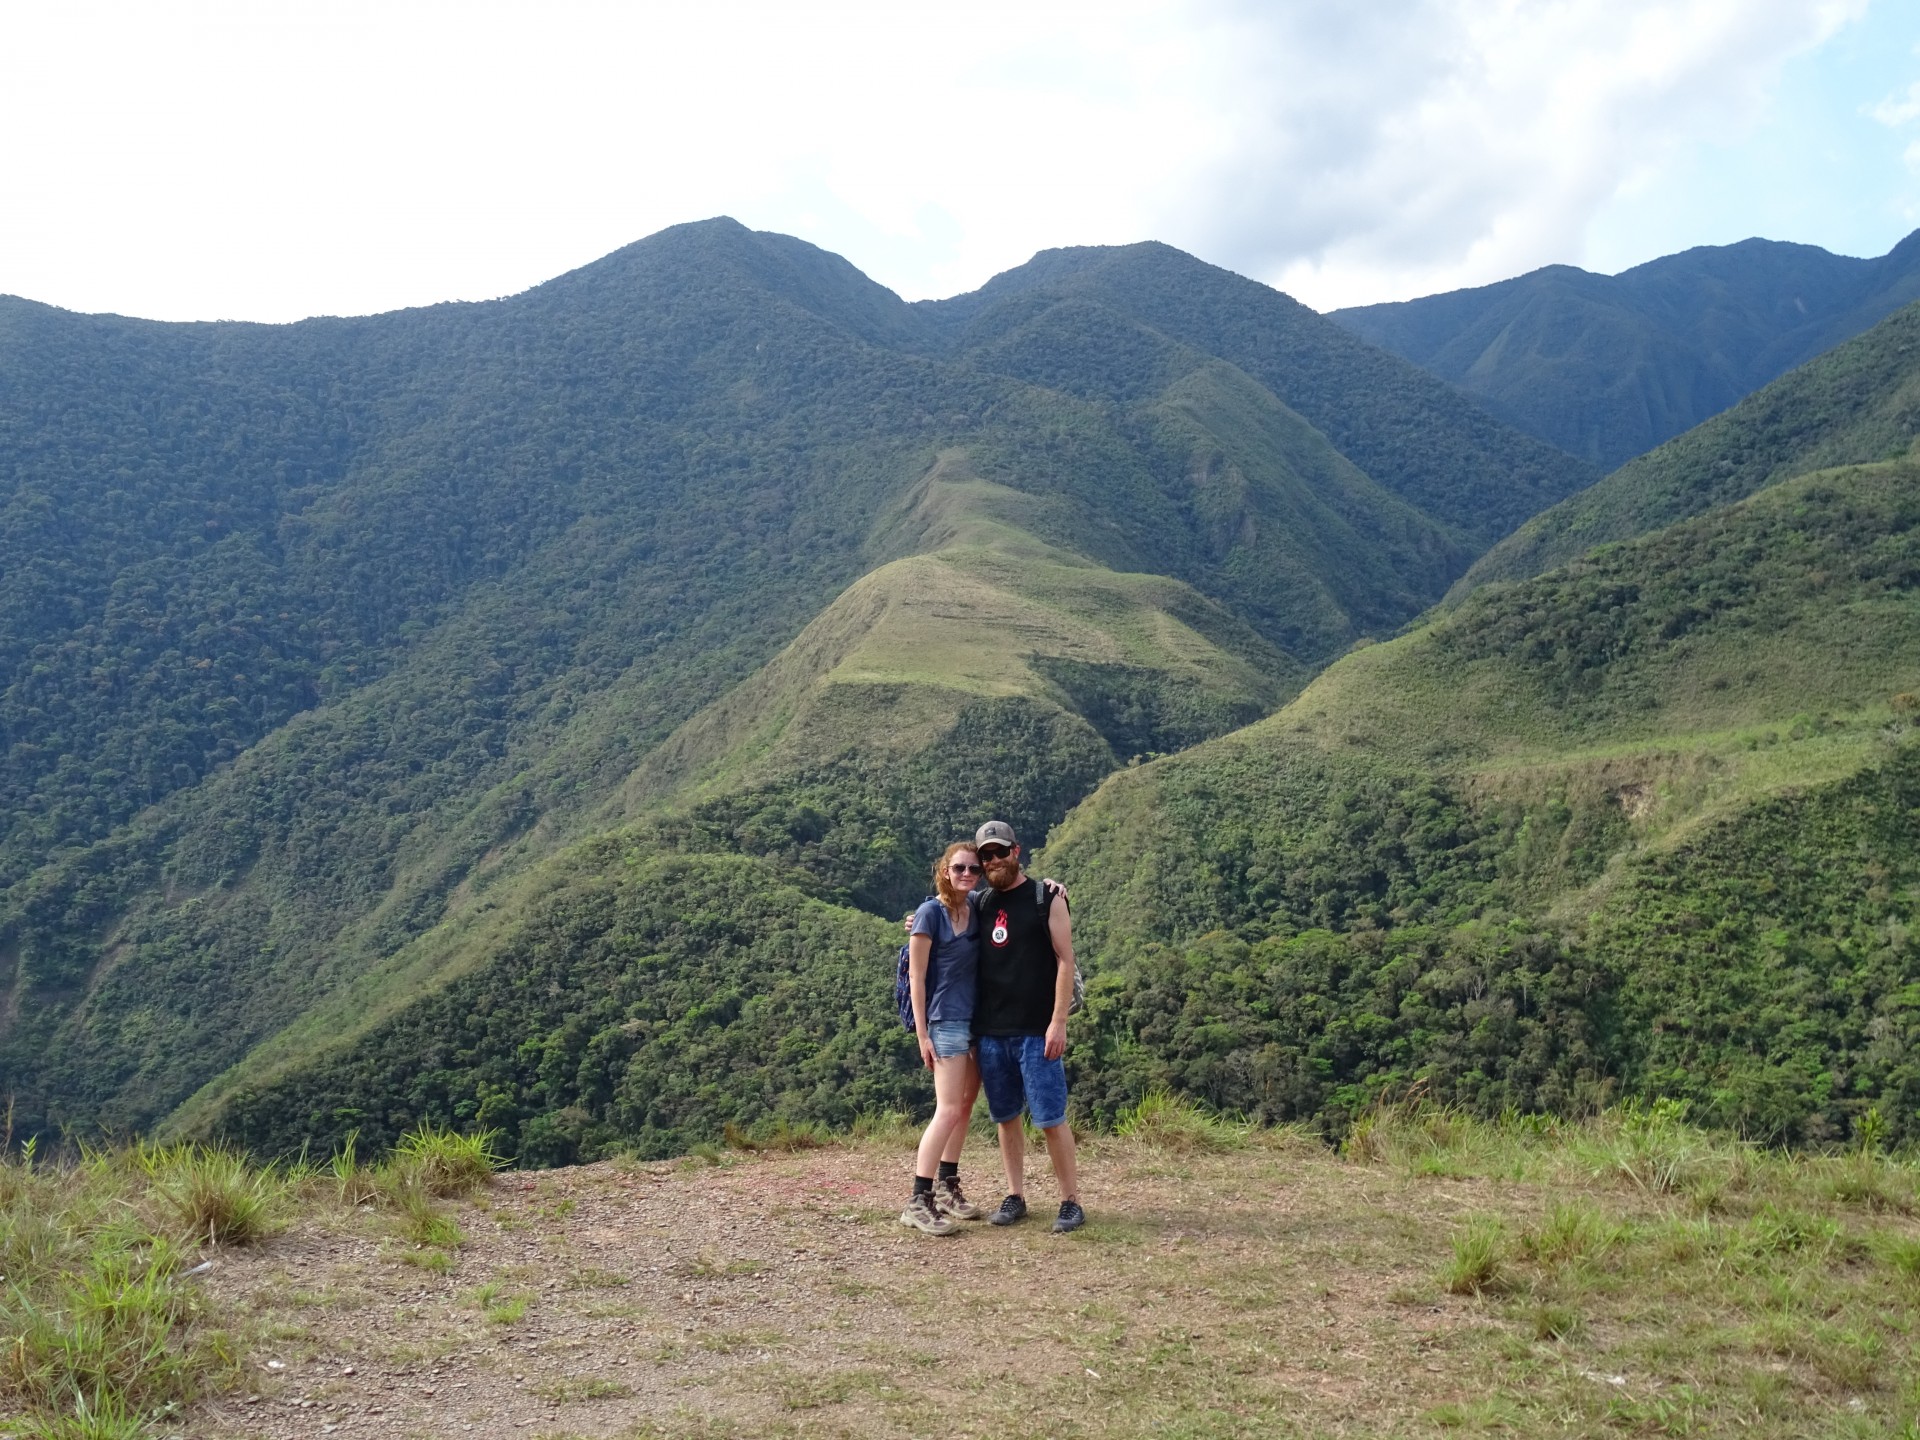 Lauren, Mike and the Yungas mountains.